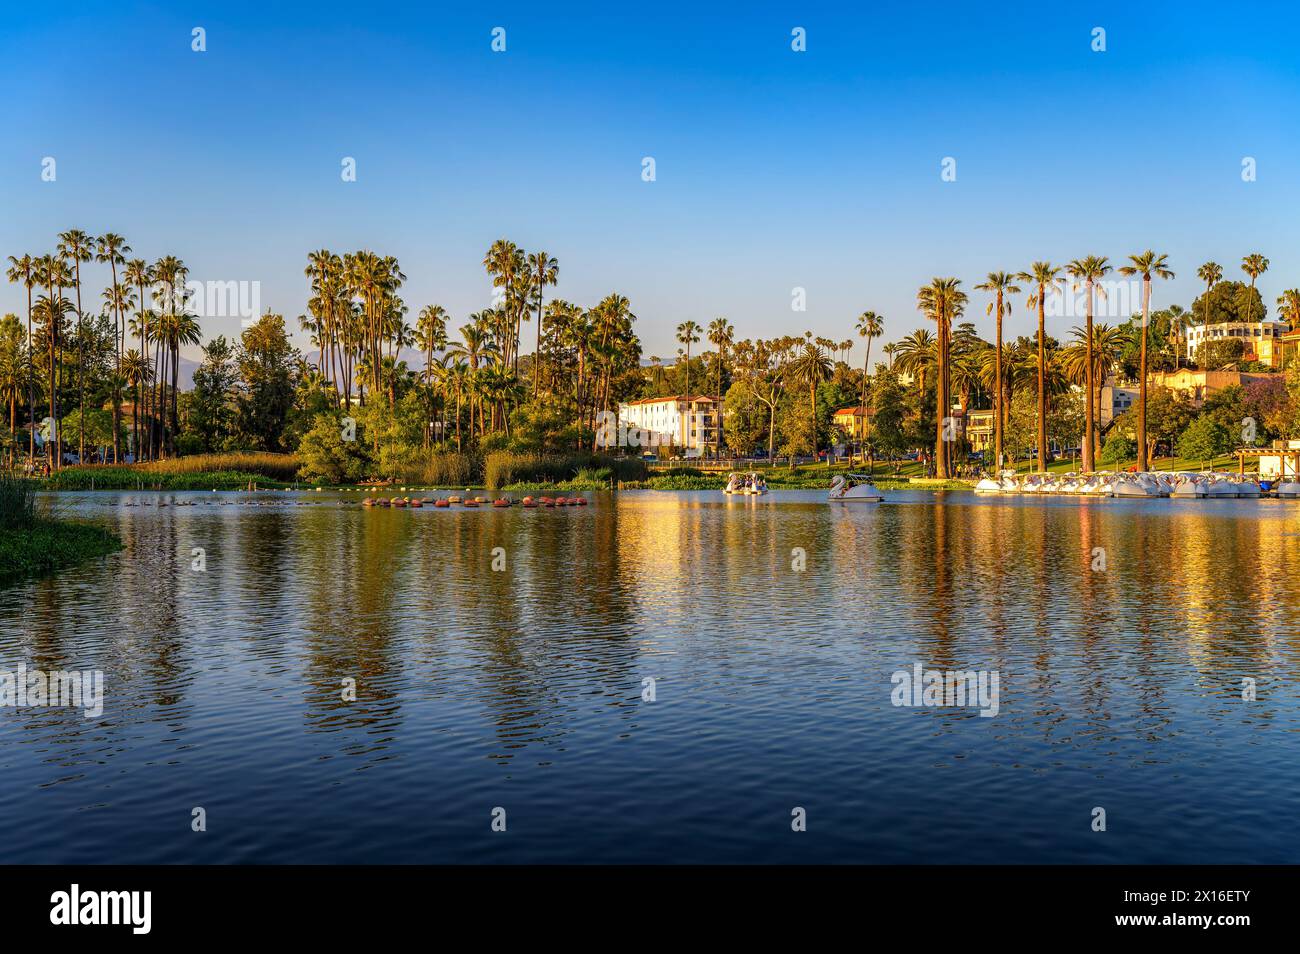 Echo Park Lake with pedal boats and palm trees in Los Angeles, California Stock Photo